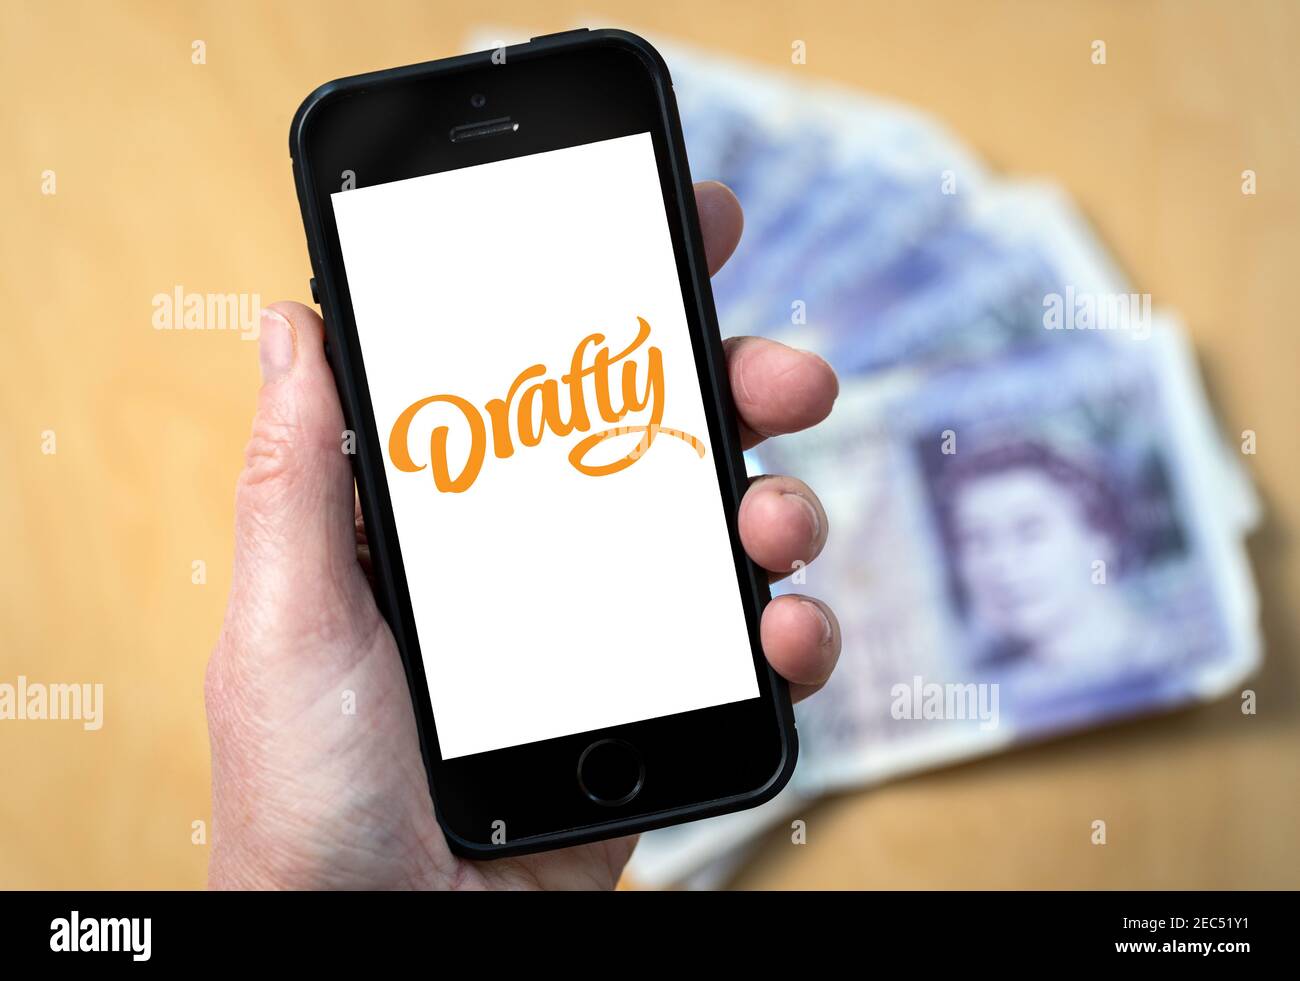 A woman looking at the Drafty App logo on her mobile phone. (editorial use only) Stock Photo